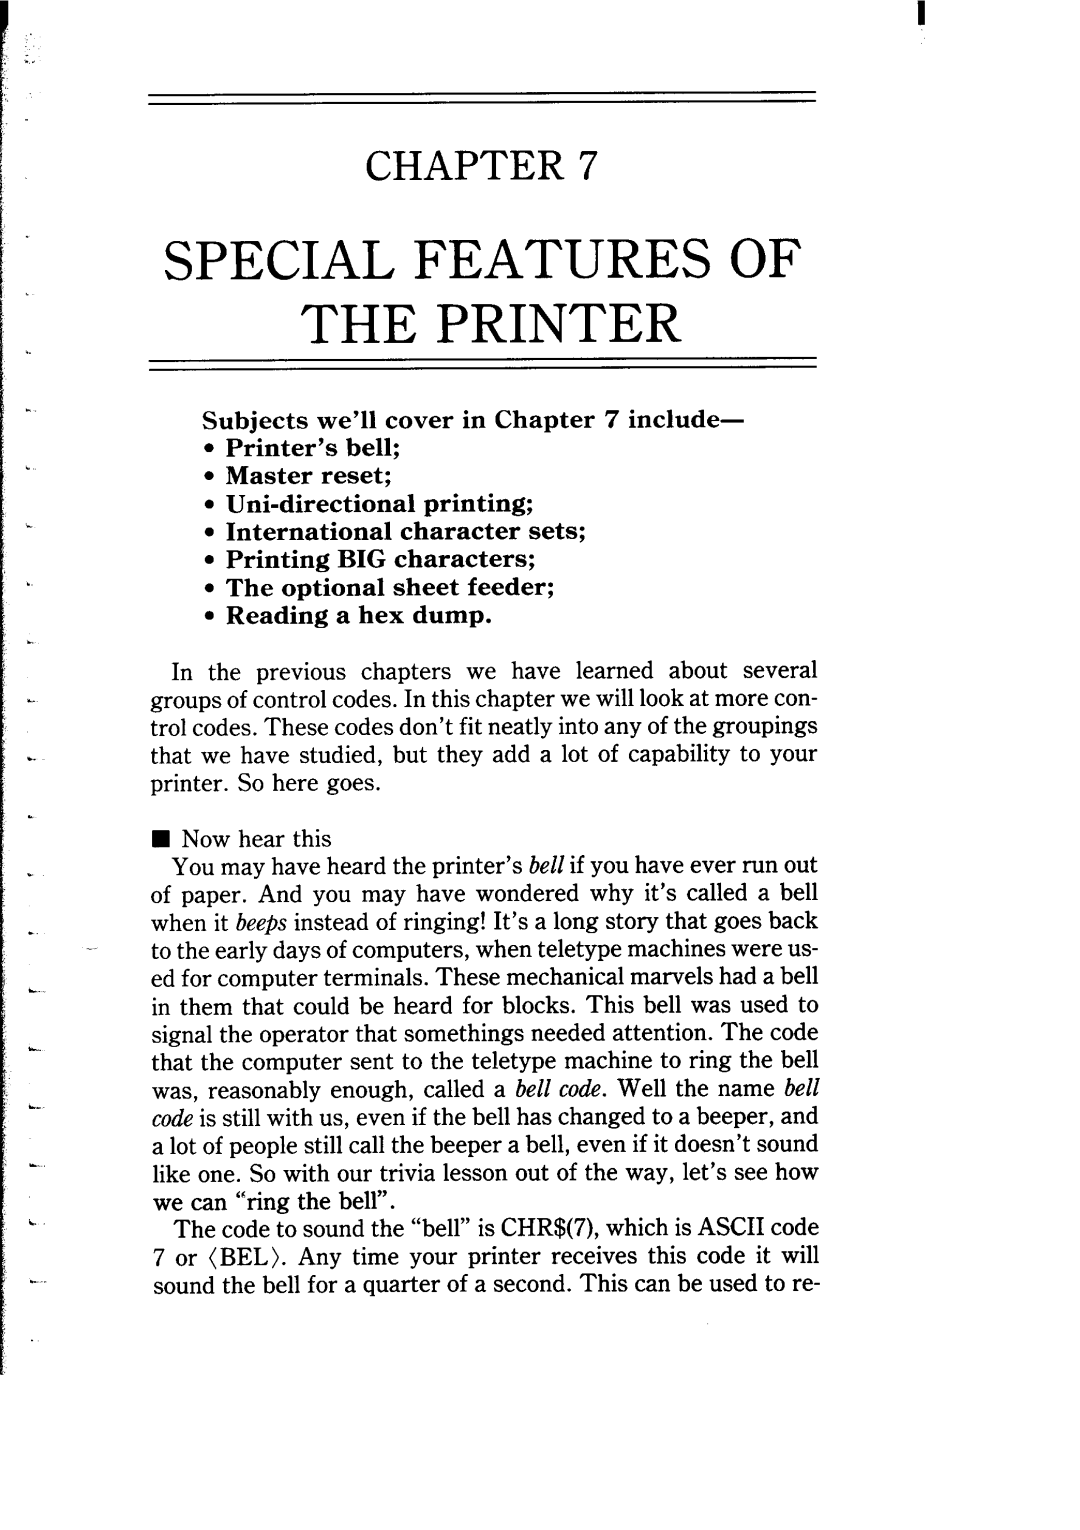 Star Micronics NB-15 user manual Special Features Of The Printer, Chapter, Subjects we’ll cover in include 